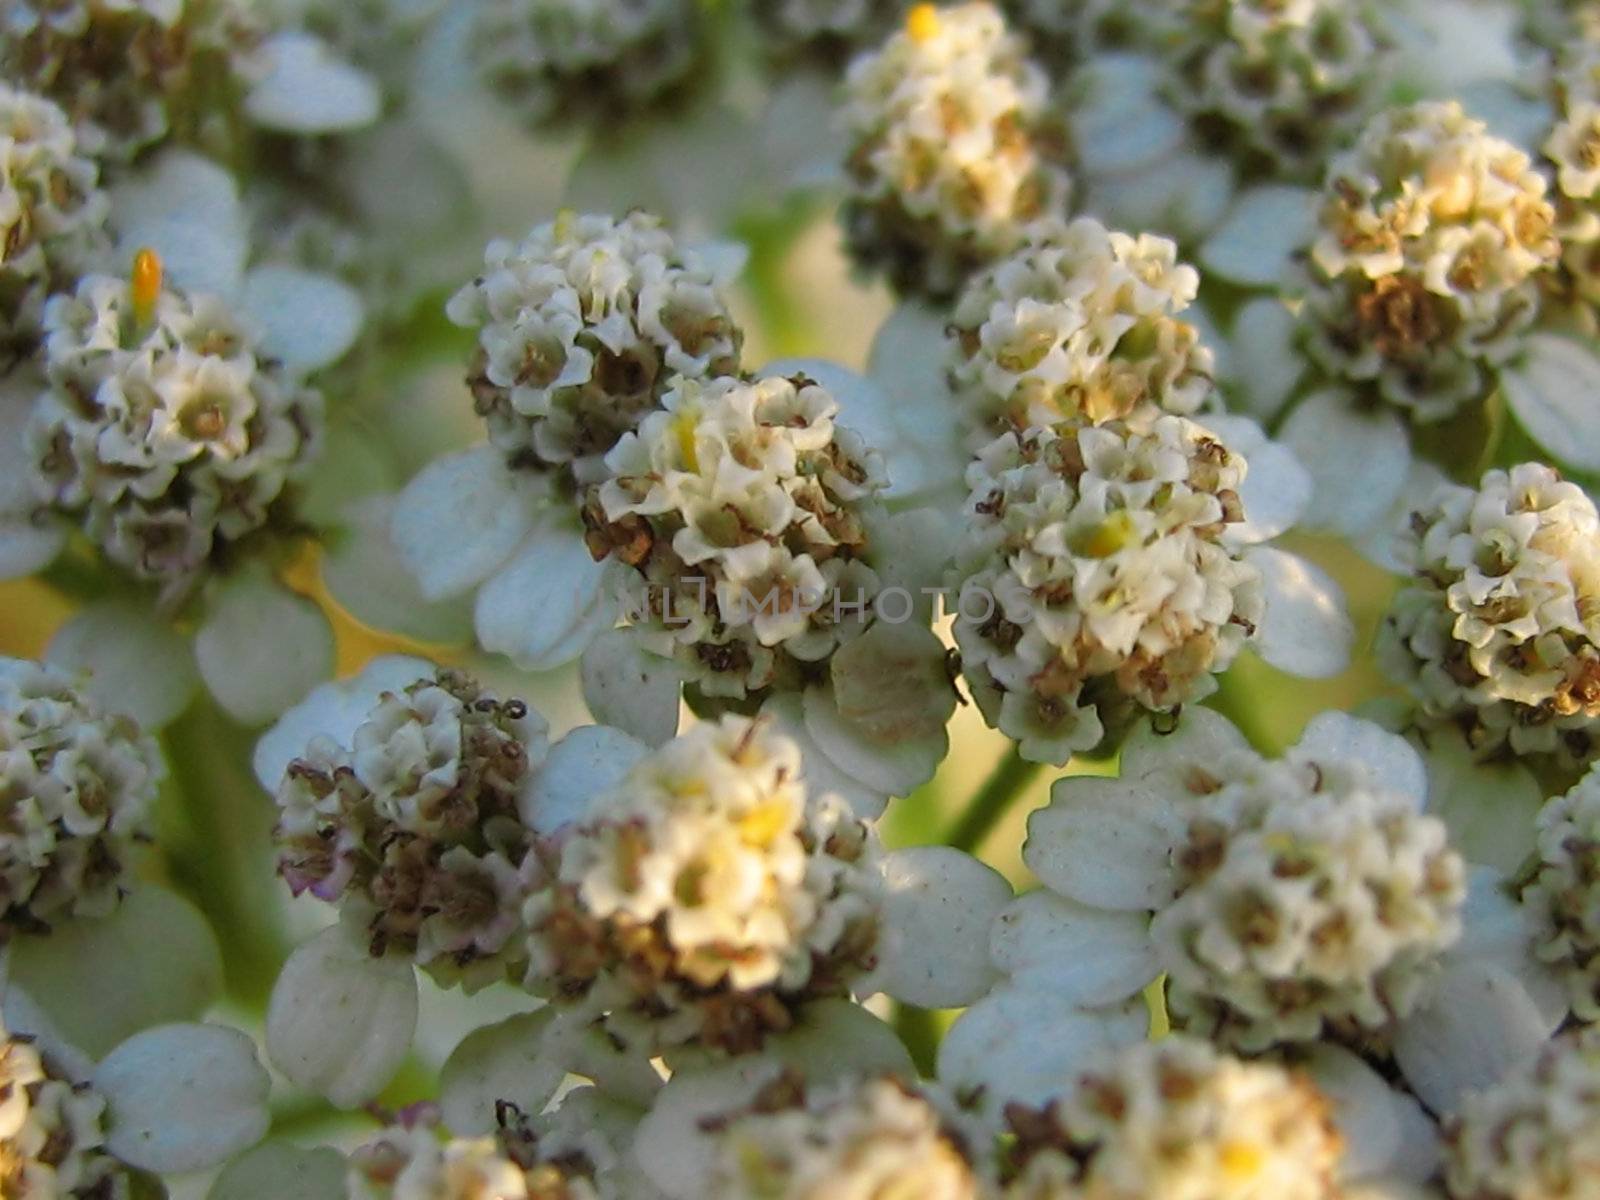 This is a close-up photo of a Yarrow plant detailing the unusual structure of its blossoms. The Yarrow is a perennial flowering plant of the family Asteraceae. Originally from Eurasia, it is found throughout the Northern Hemisphere. In ancient times, Yarrow was known for its use in staunching the flow of blood from wounds.